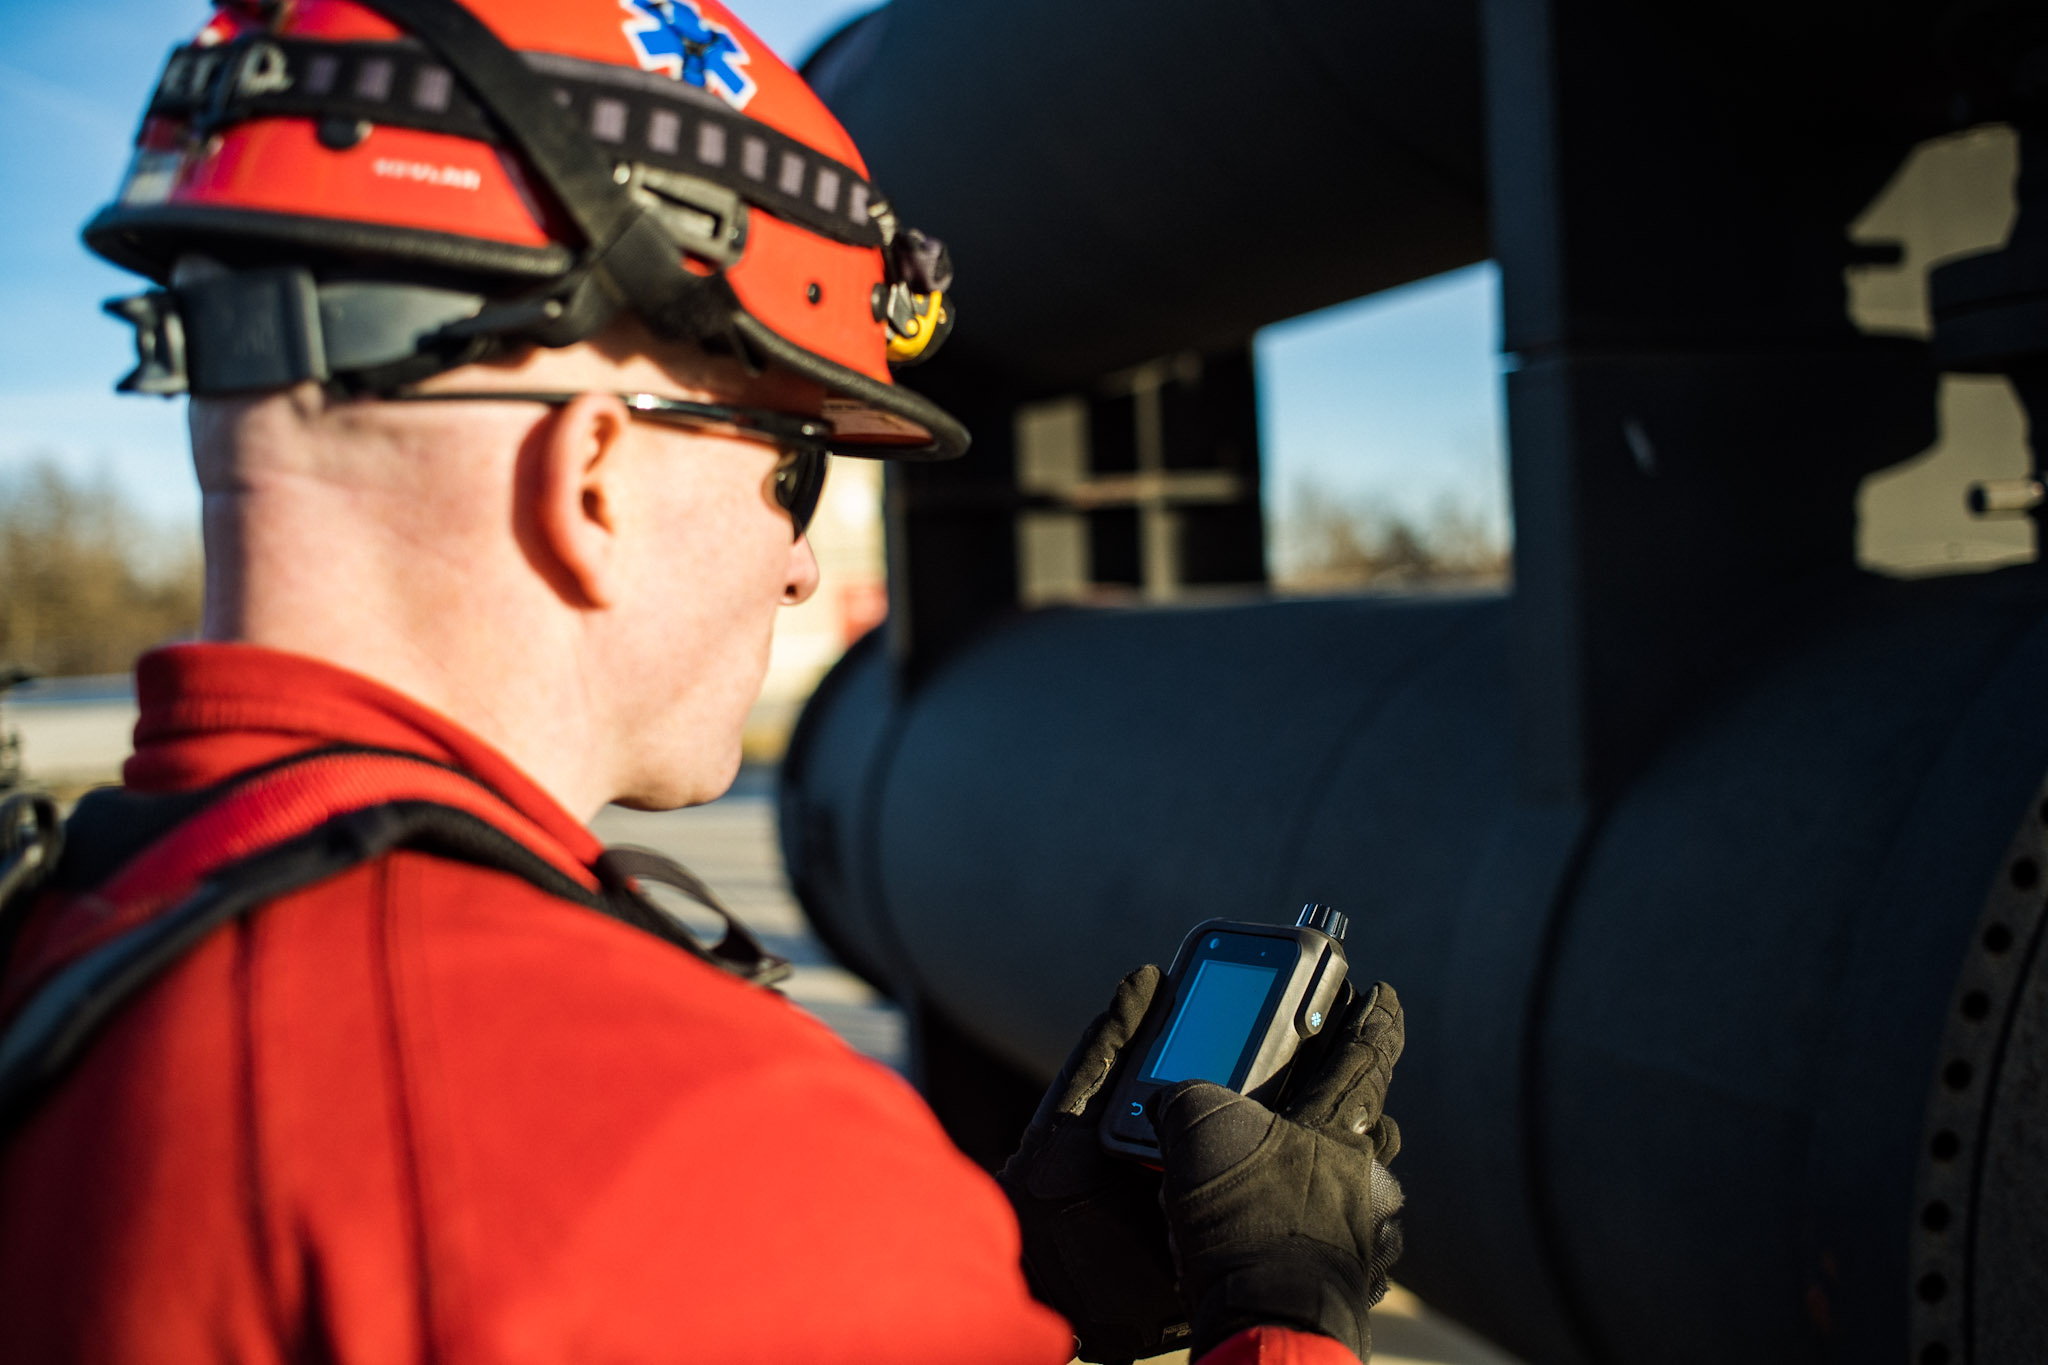 industrial radios for every worker